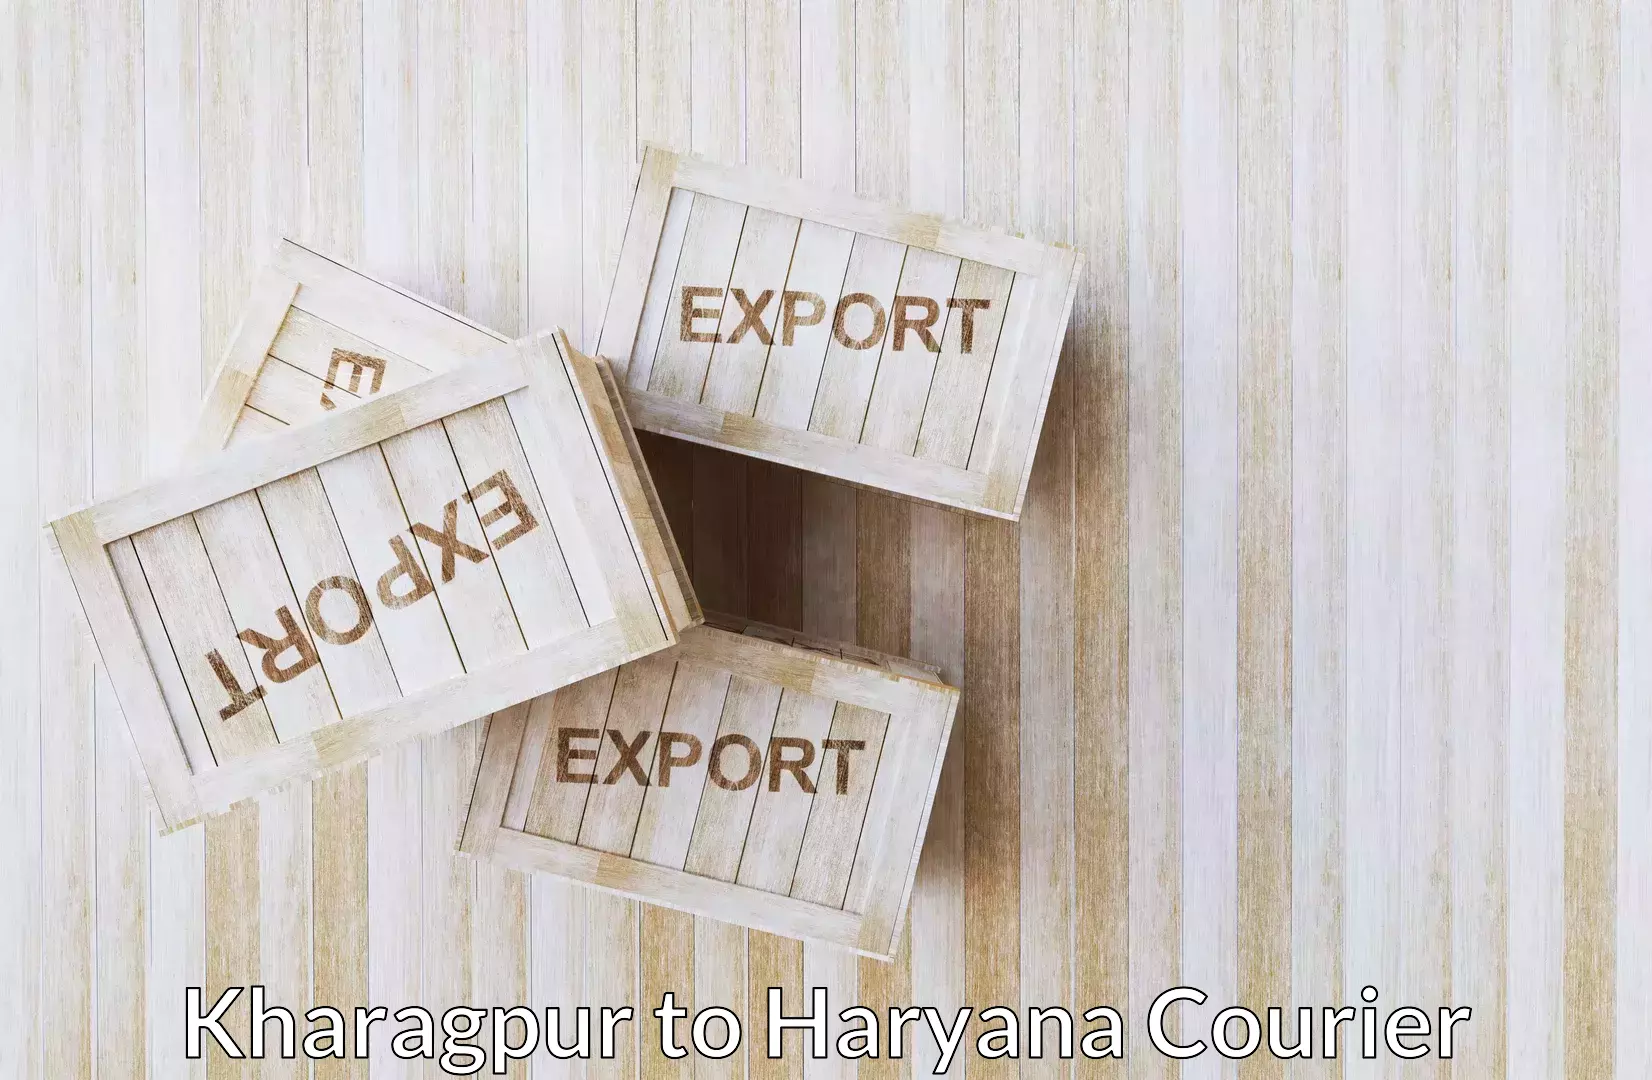 Heavy luggage shipping in Kharagpur to NCR Haryana